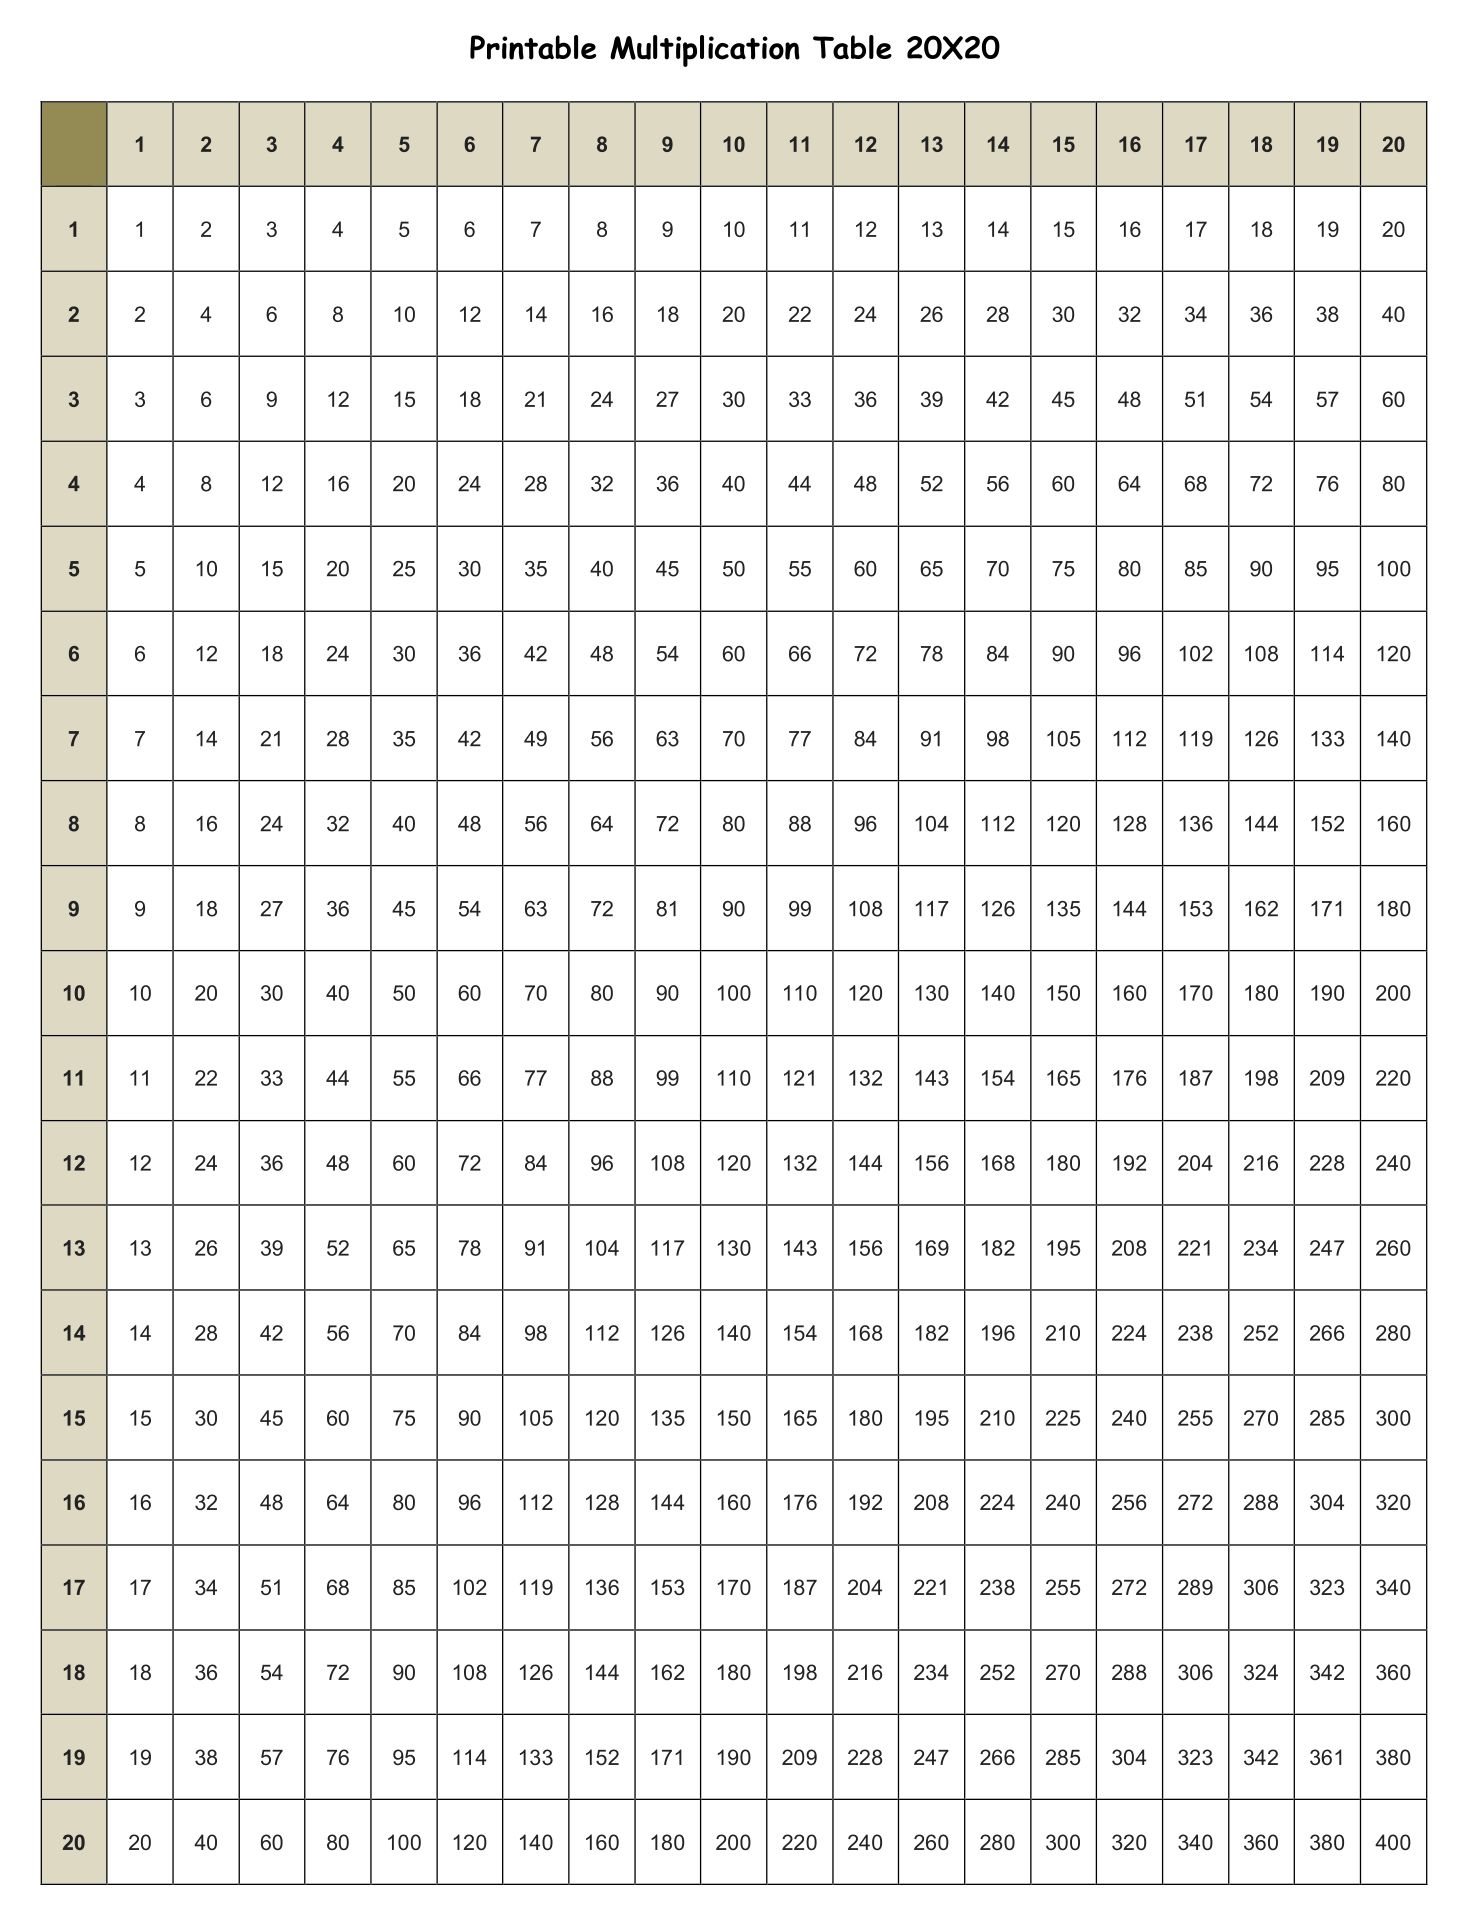 multiplication-table-1-20-learn-educational-paper-craft-canon-8